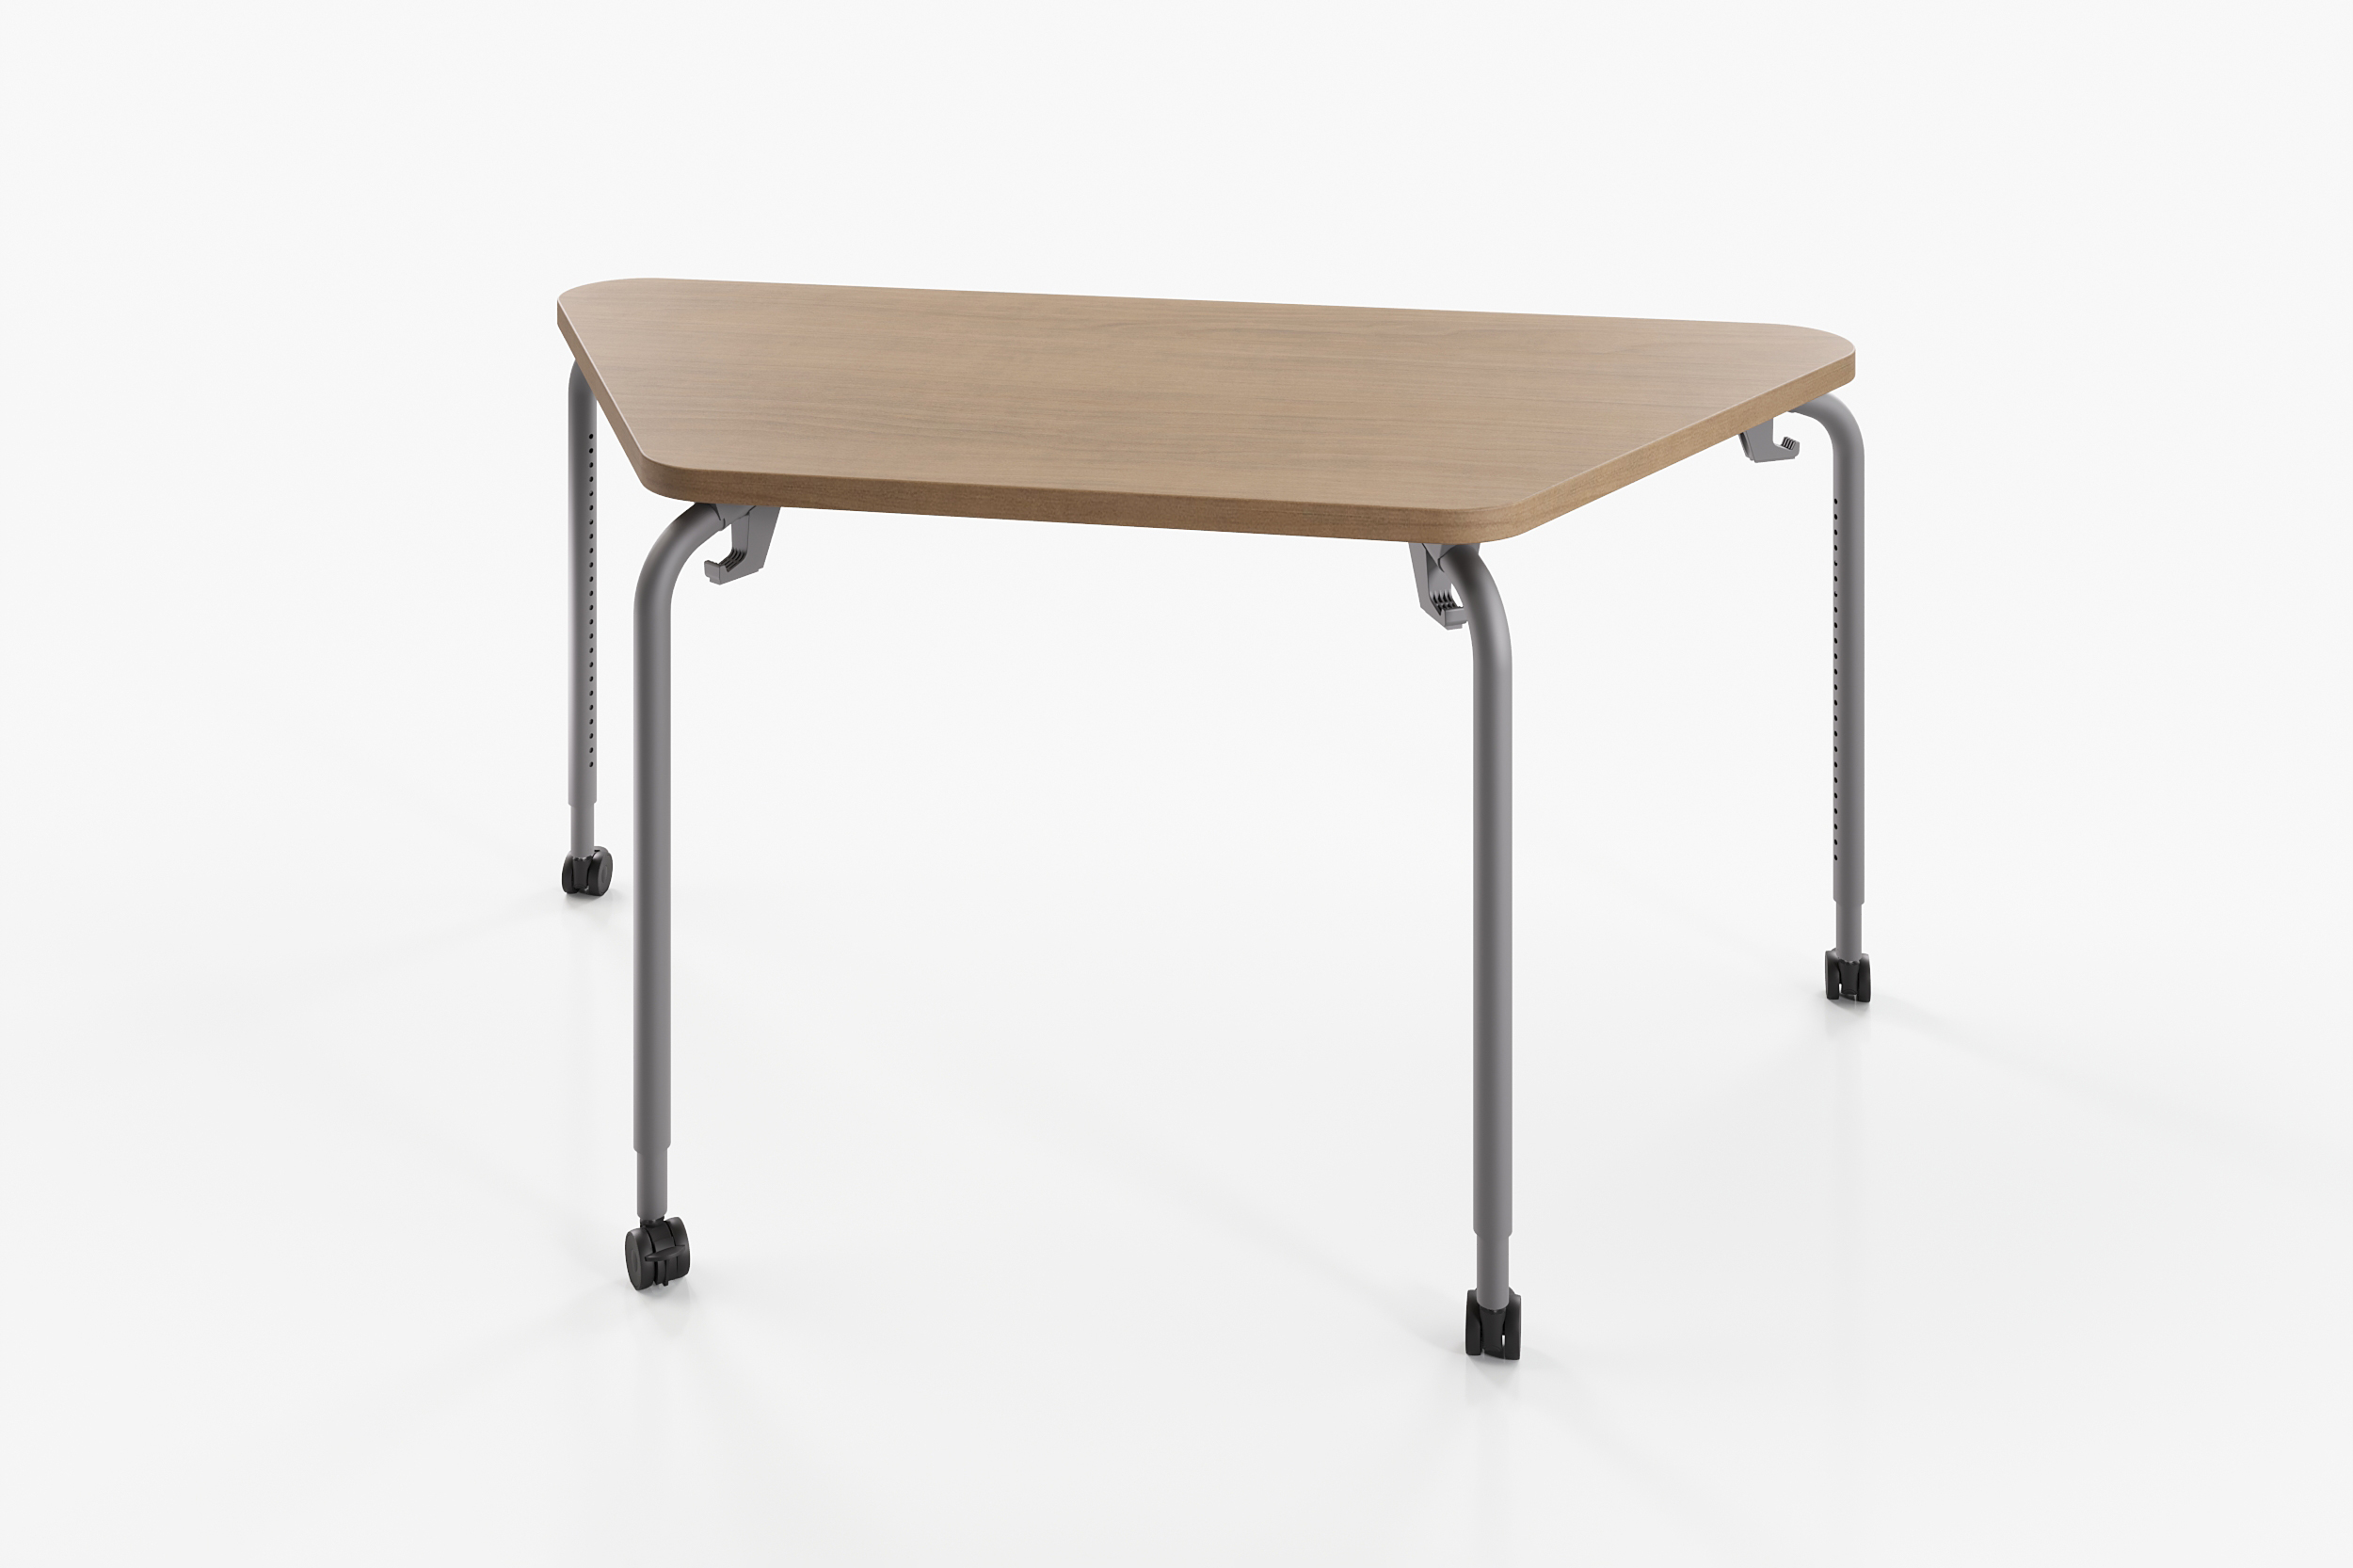 02243_60181_Numbers_High_Range_Desk_Trapezoid_30x60_wCasters_FrenchPear